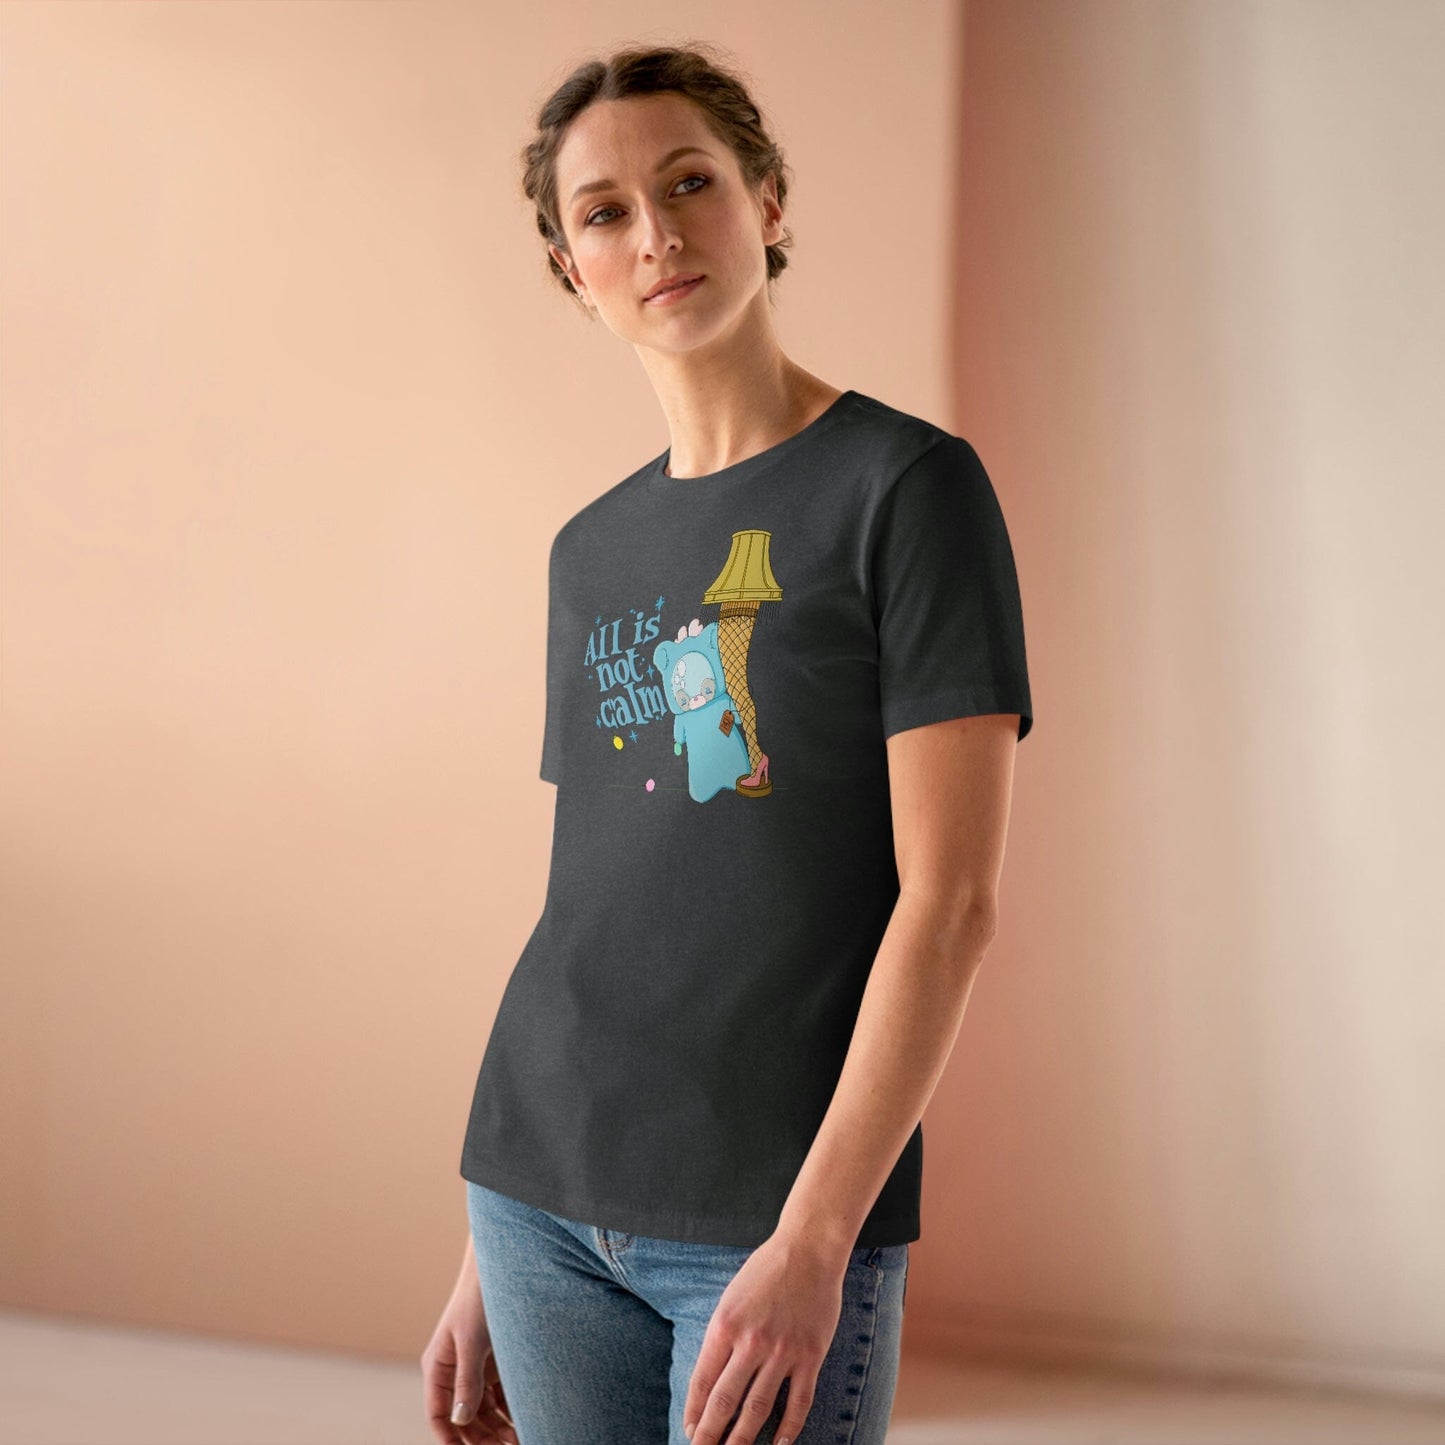 The Tag Katie Women's Tee